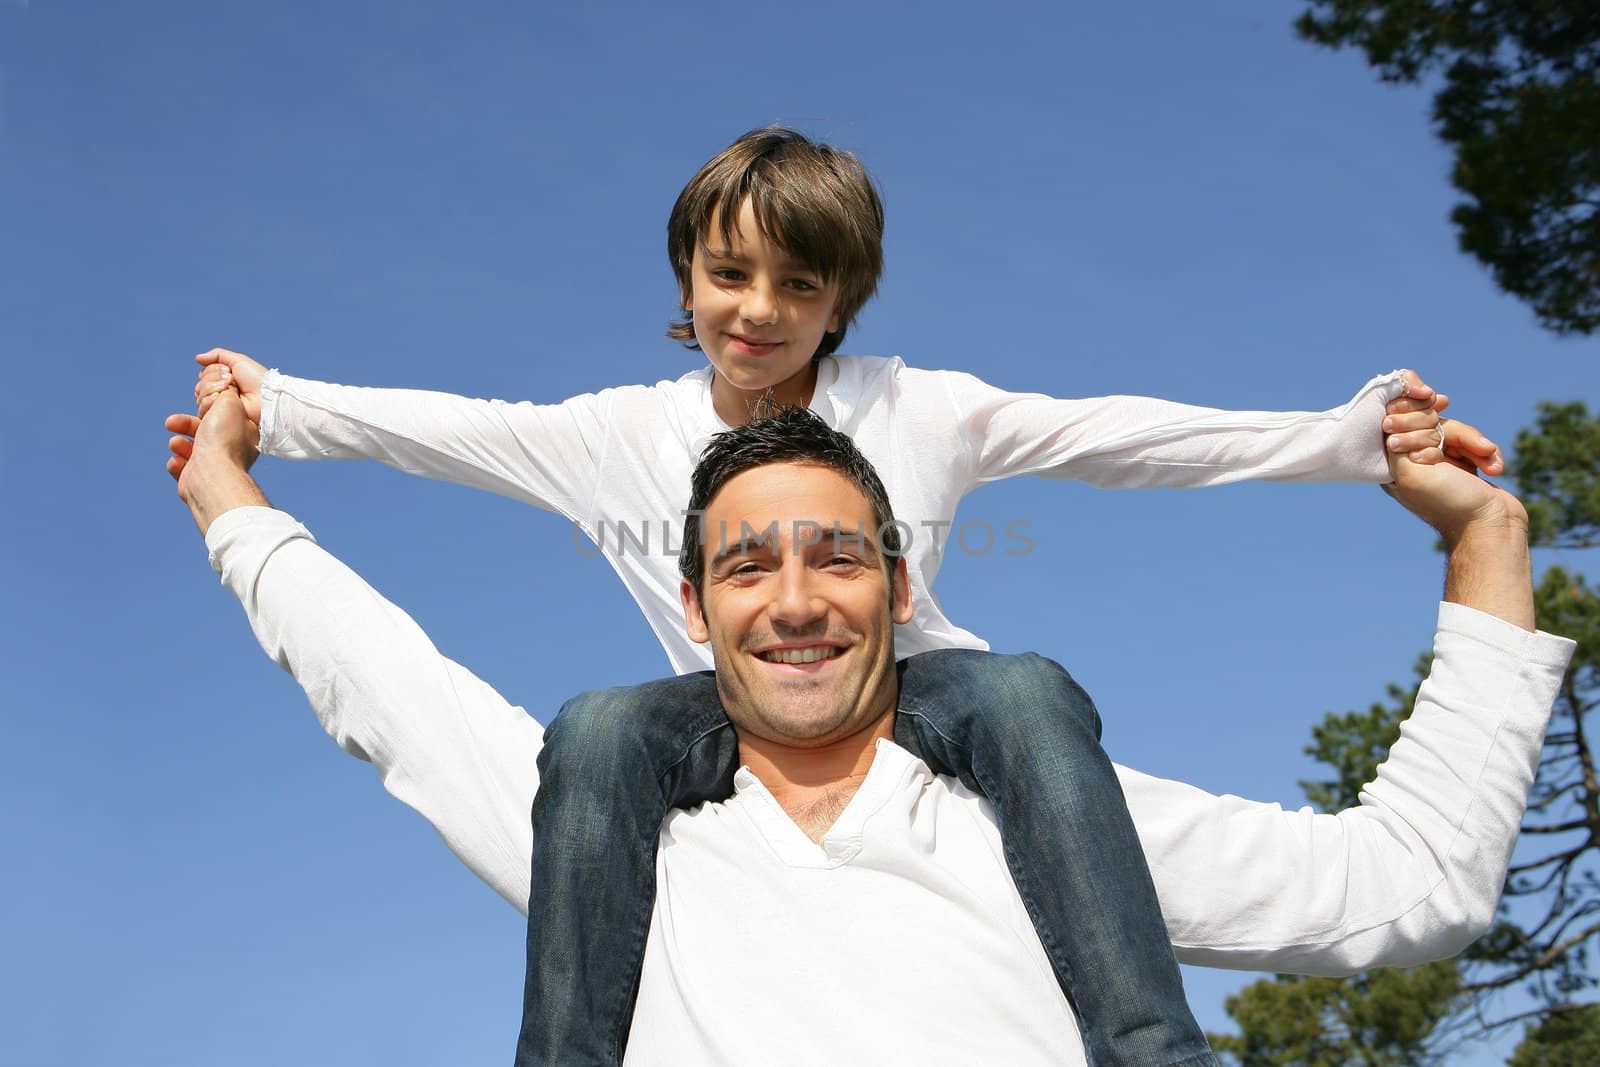 Child riding on his father's shoulders